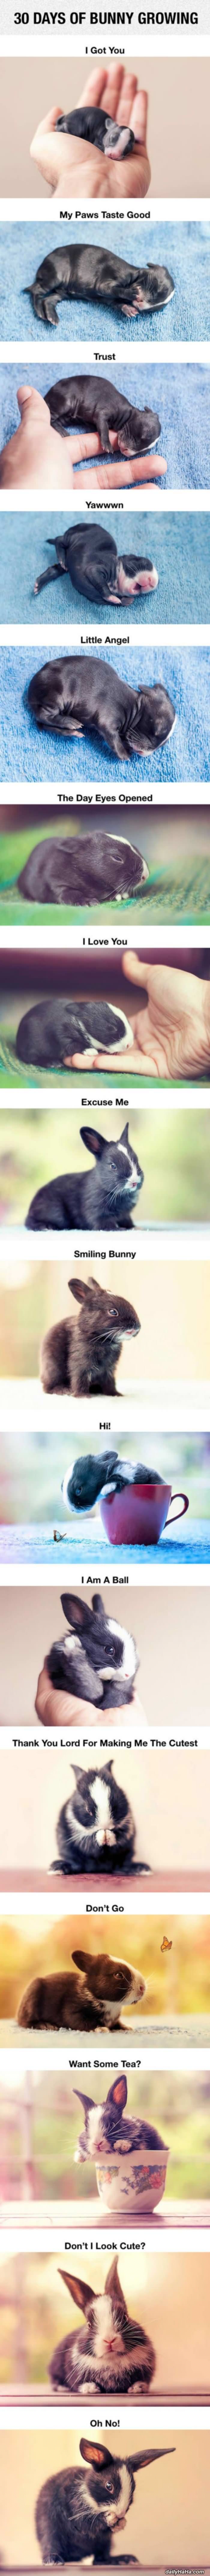 30 days of bunny growth funny picture